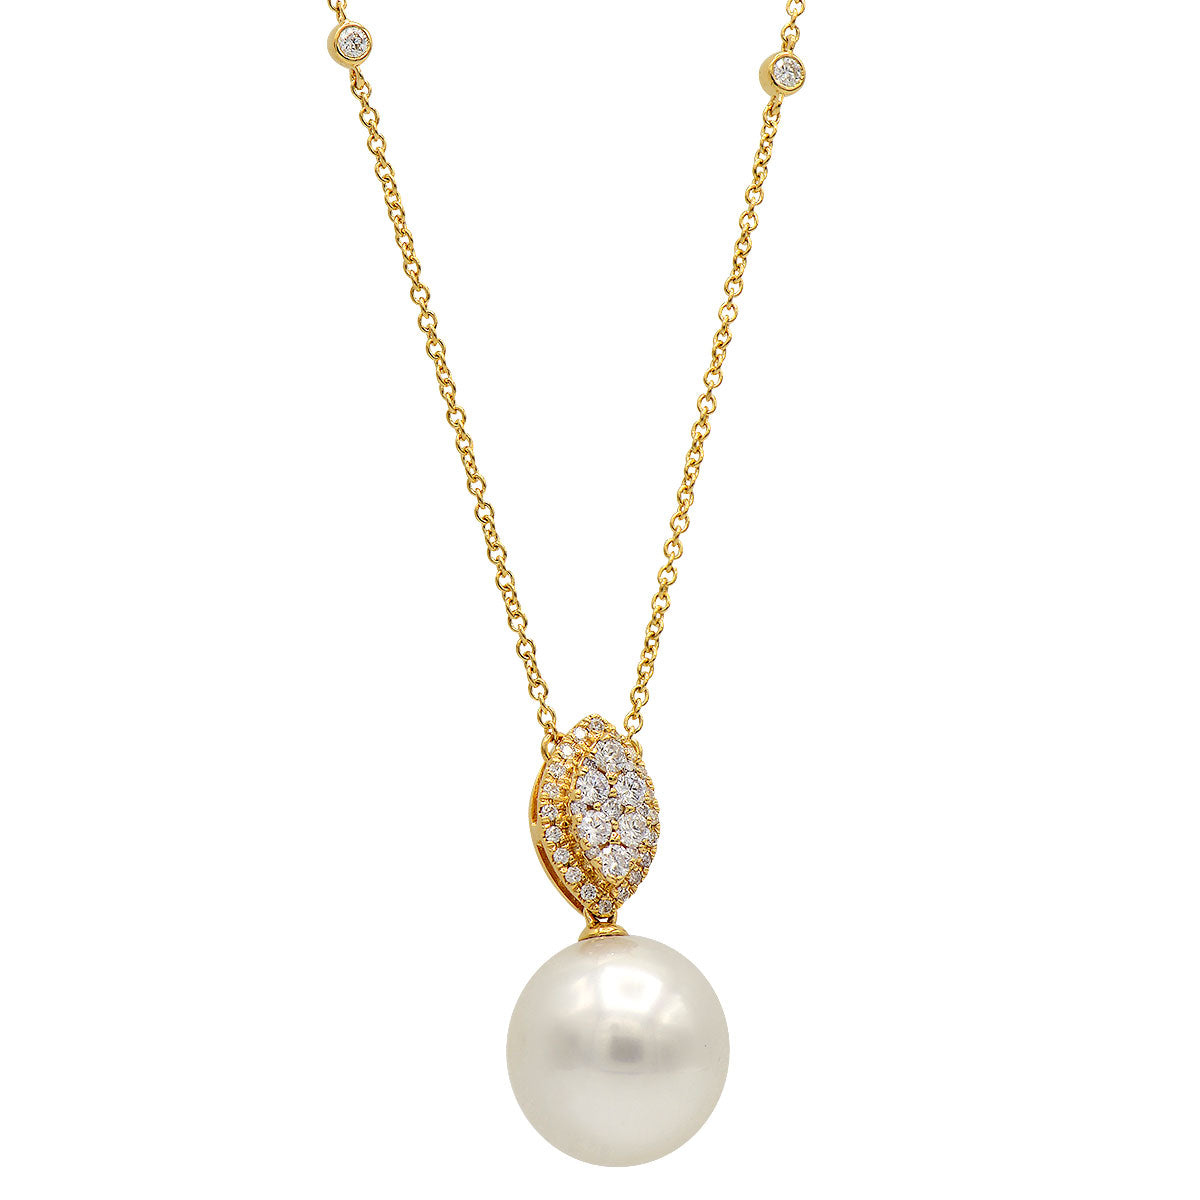 18KY White South Sea Pearl Pendant, 12-13mm